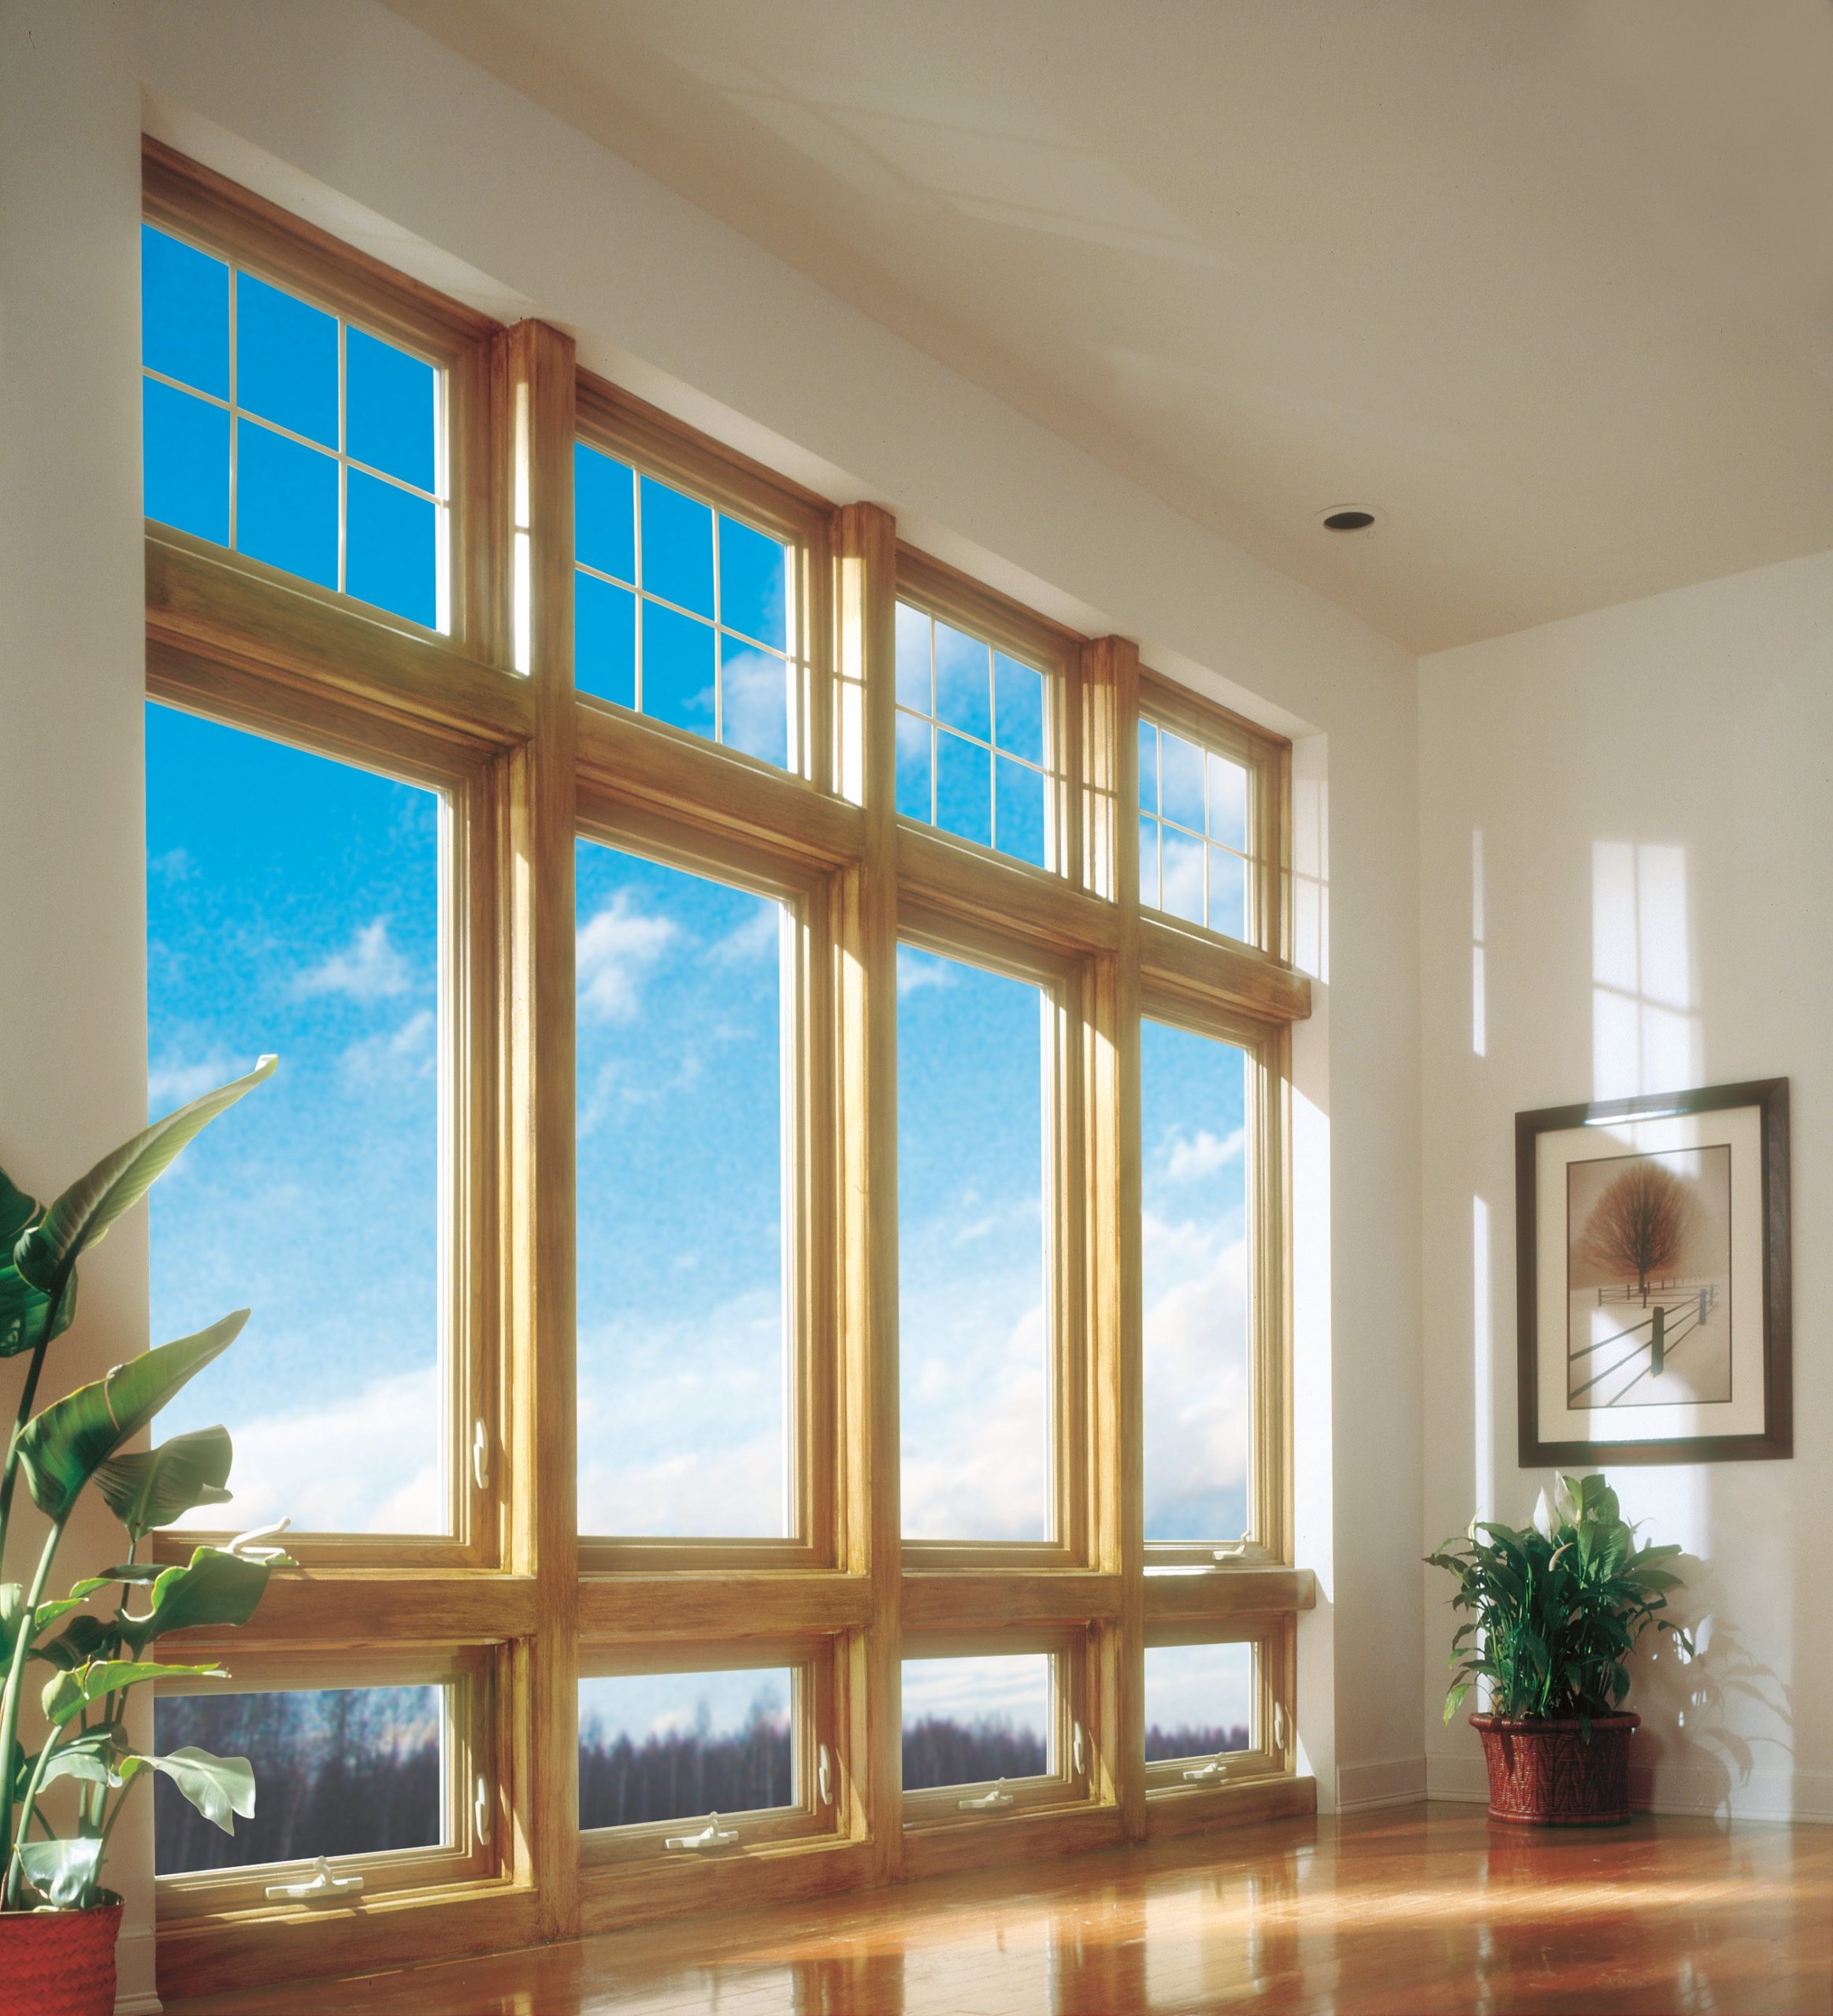 Interior view of four large casement windows with wood trim